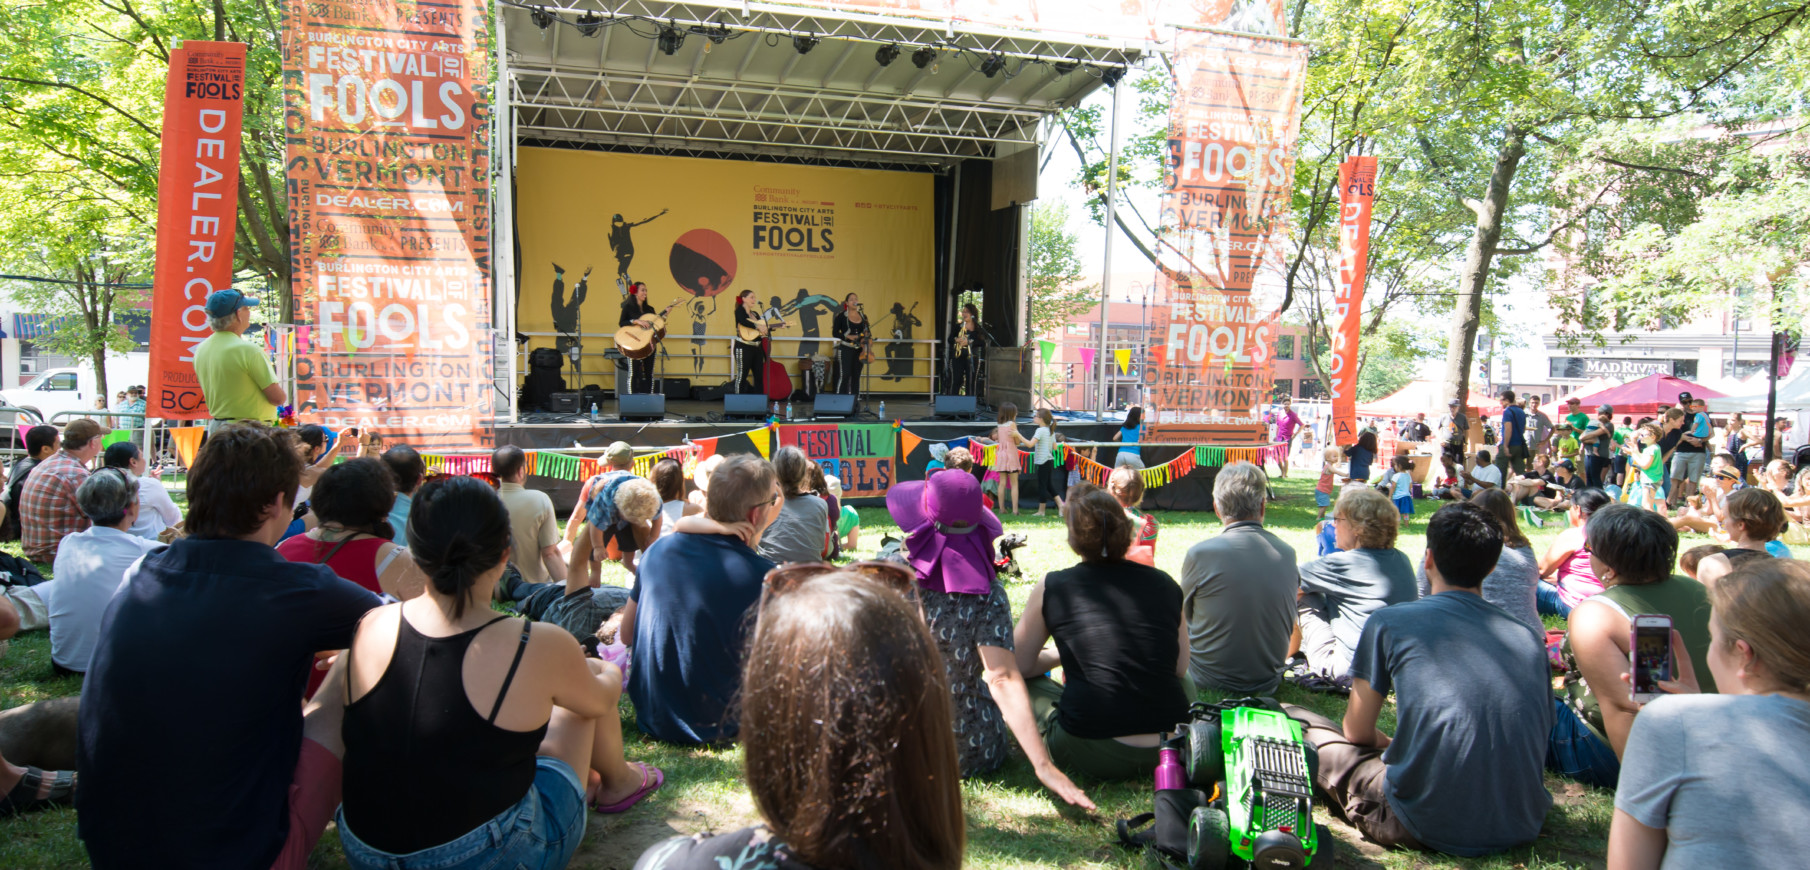 City Hall Park audience watching a concert during Festival of Fools 2019